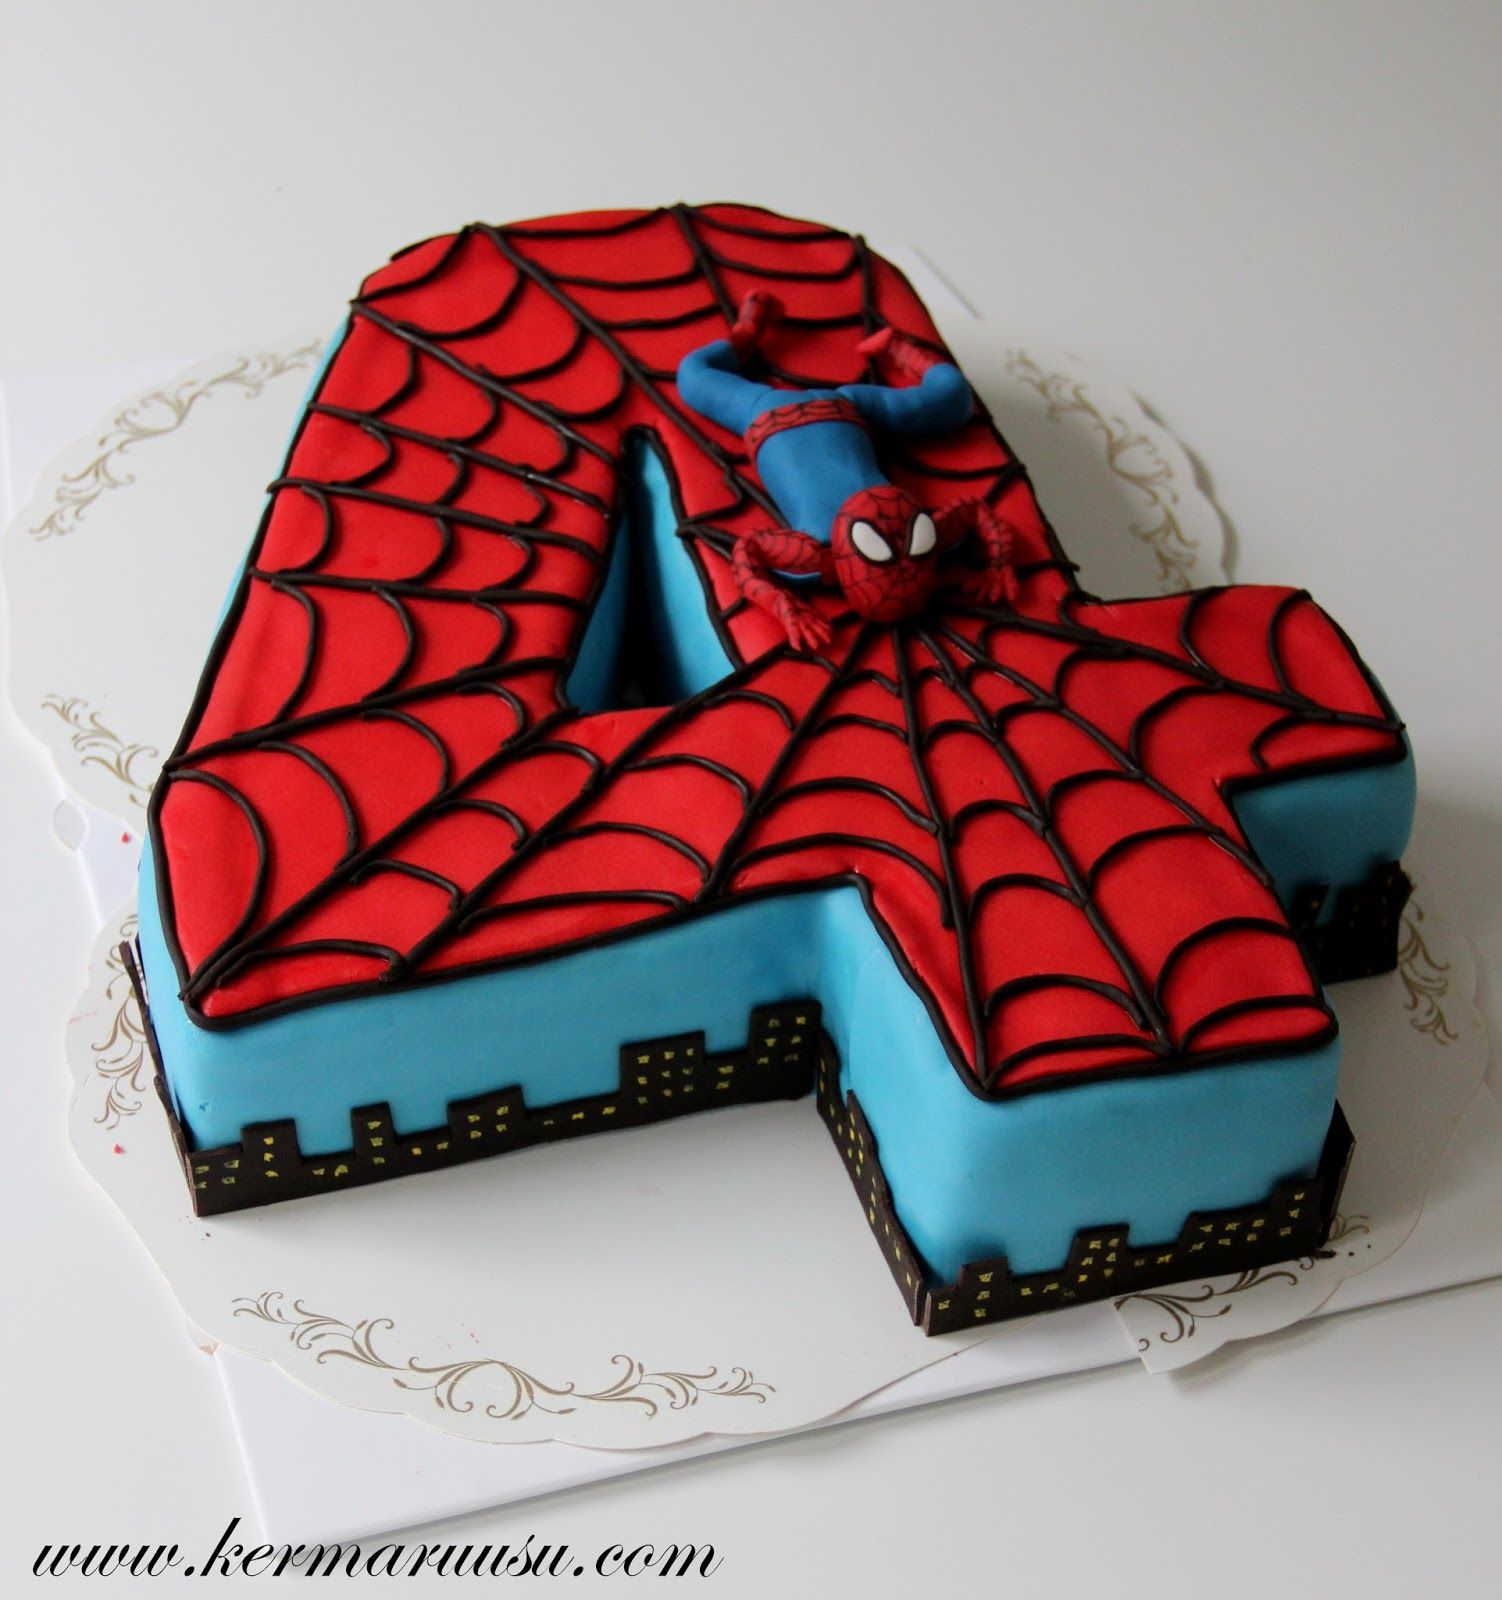 Spiderman Birthday Cakes Spiderman Cake Visit To Grab An Amazing Super Hero Shirt Now On Birijus Com,Nail Art Designs Easy To Do At Home